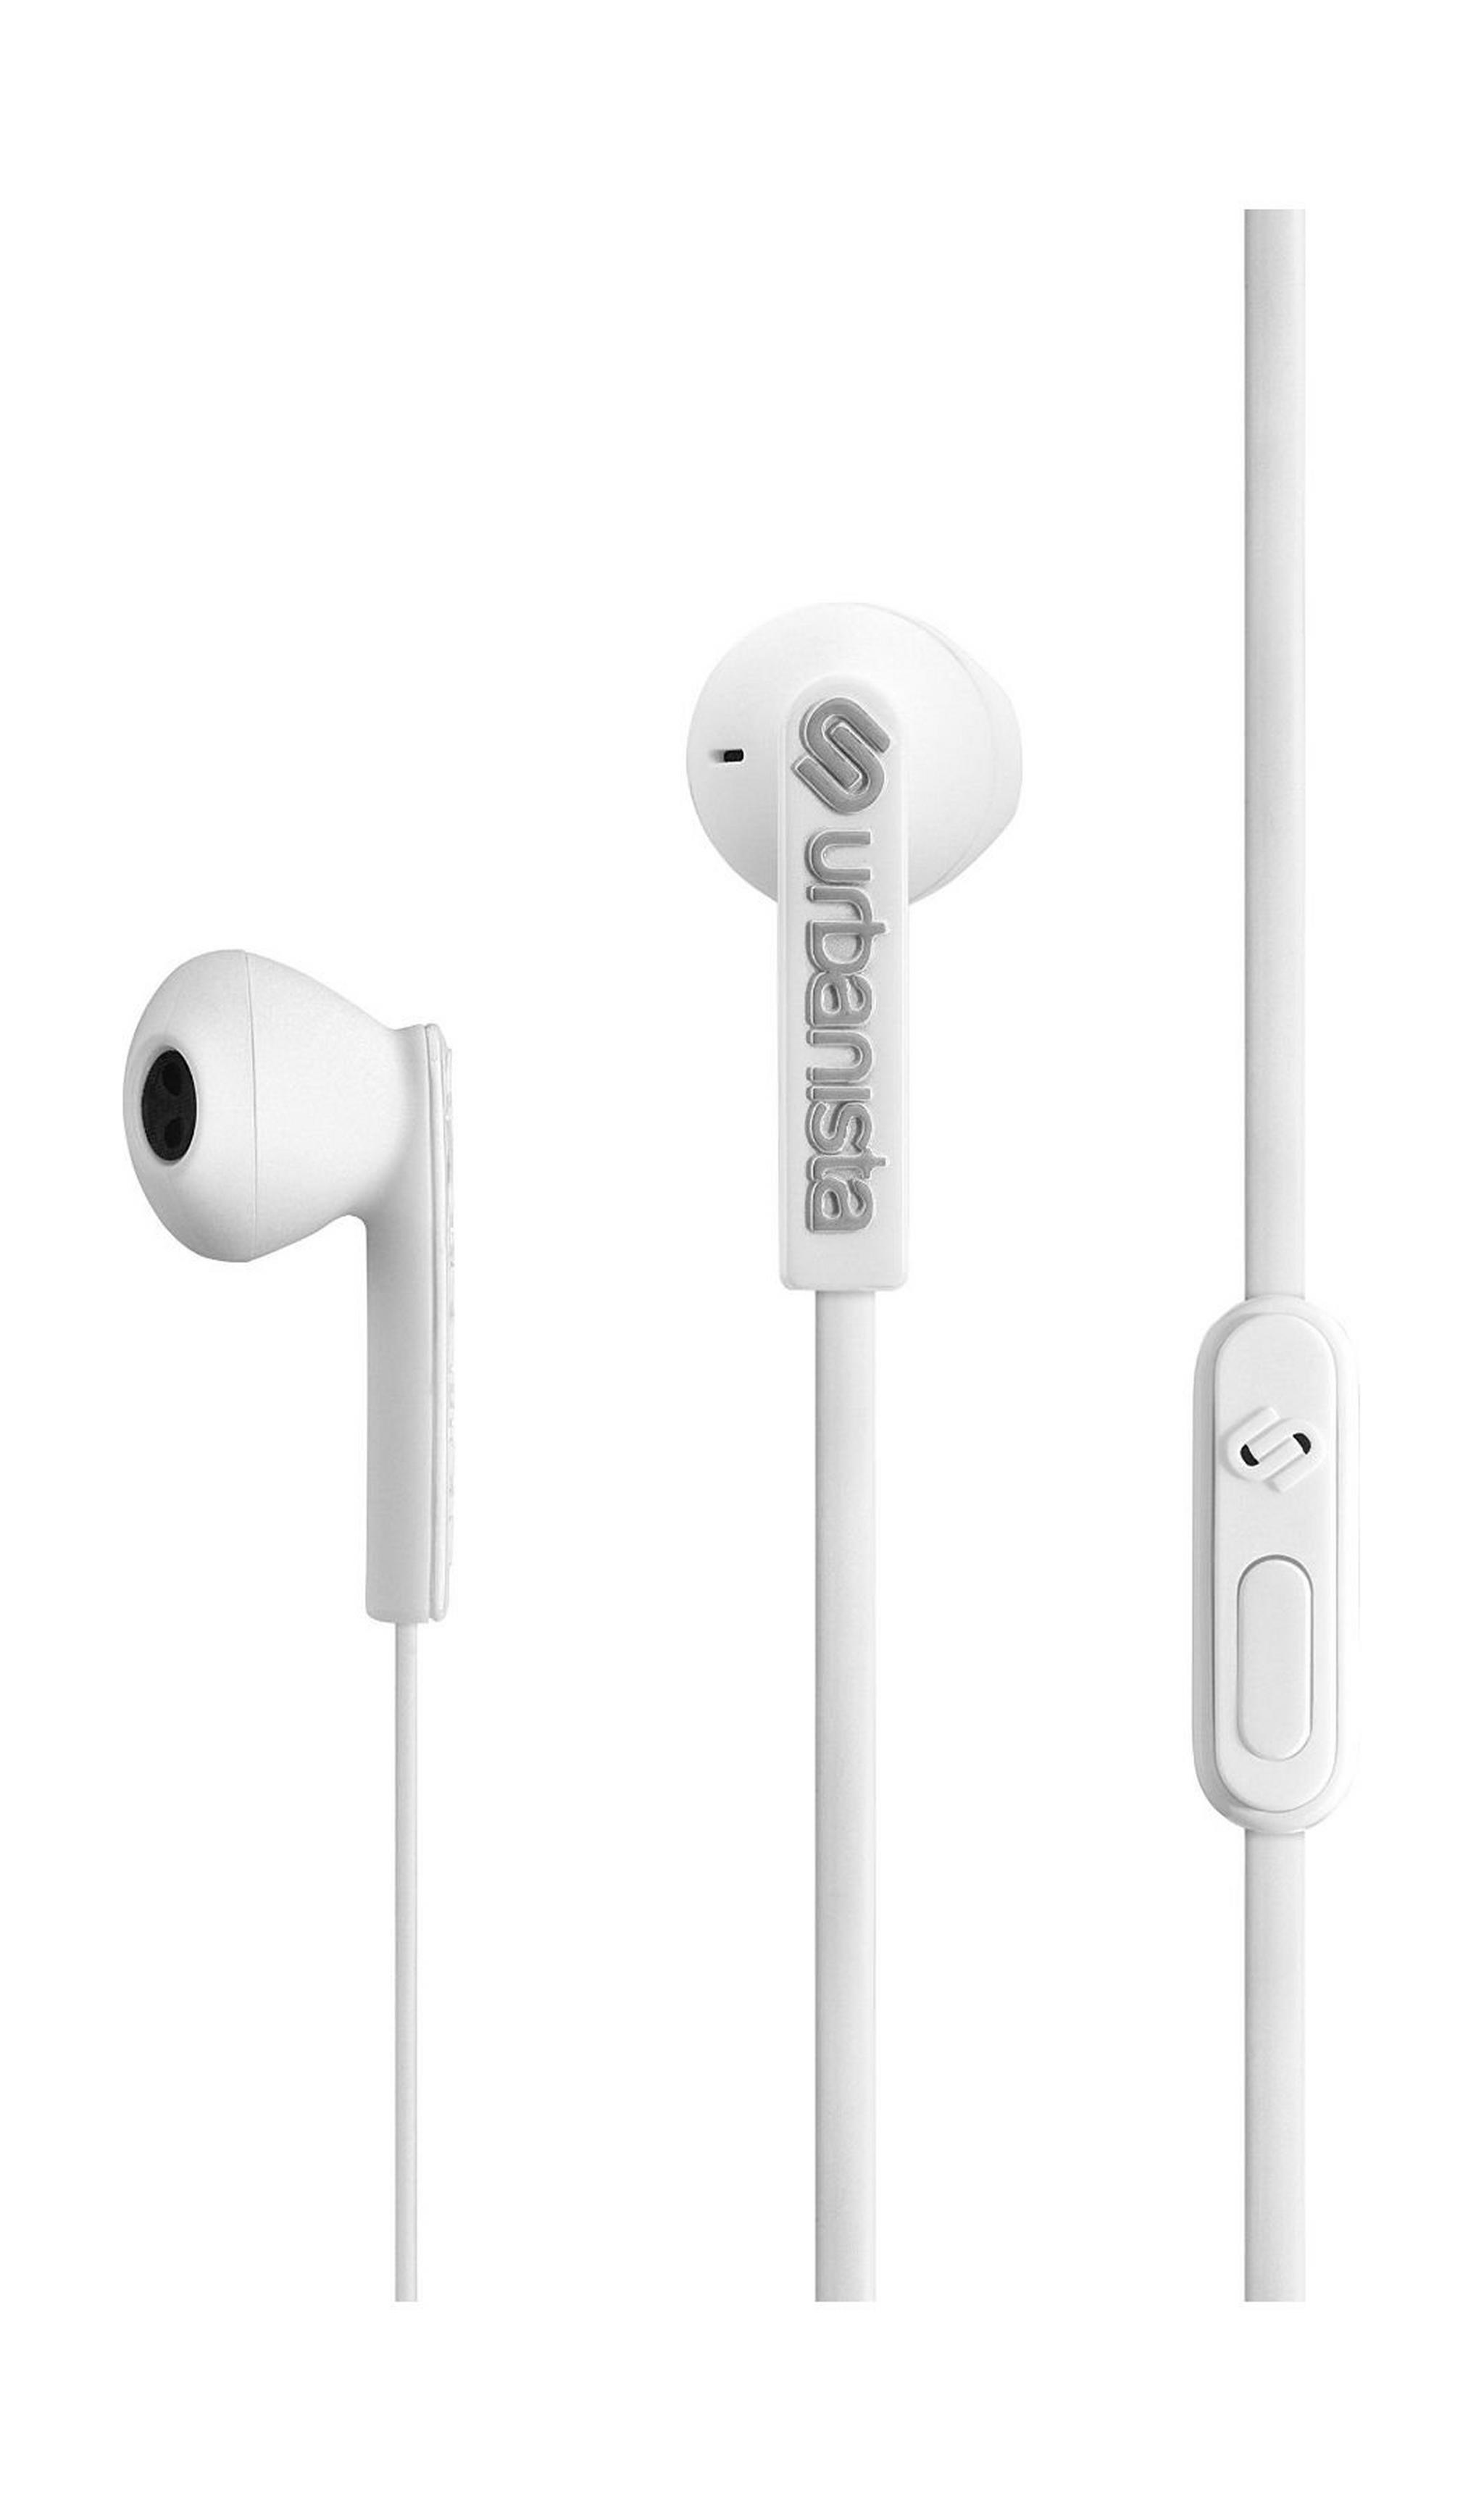 Urbanista San Francisco Wired In-ear Earphones with Mic URB-1032503 - White